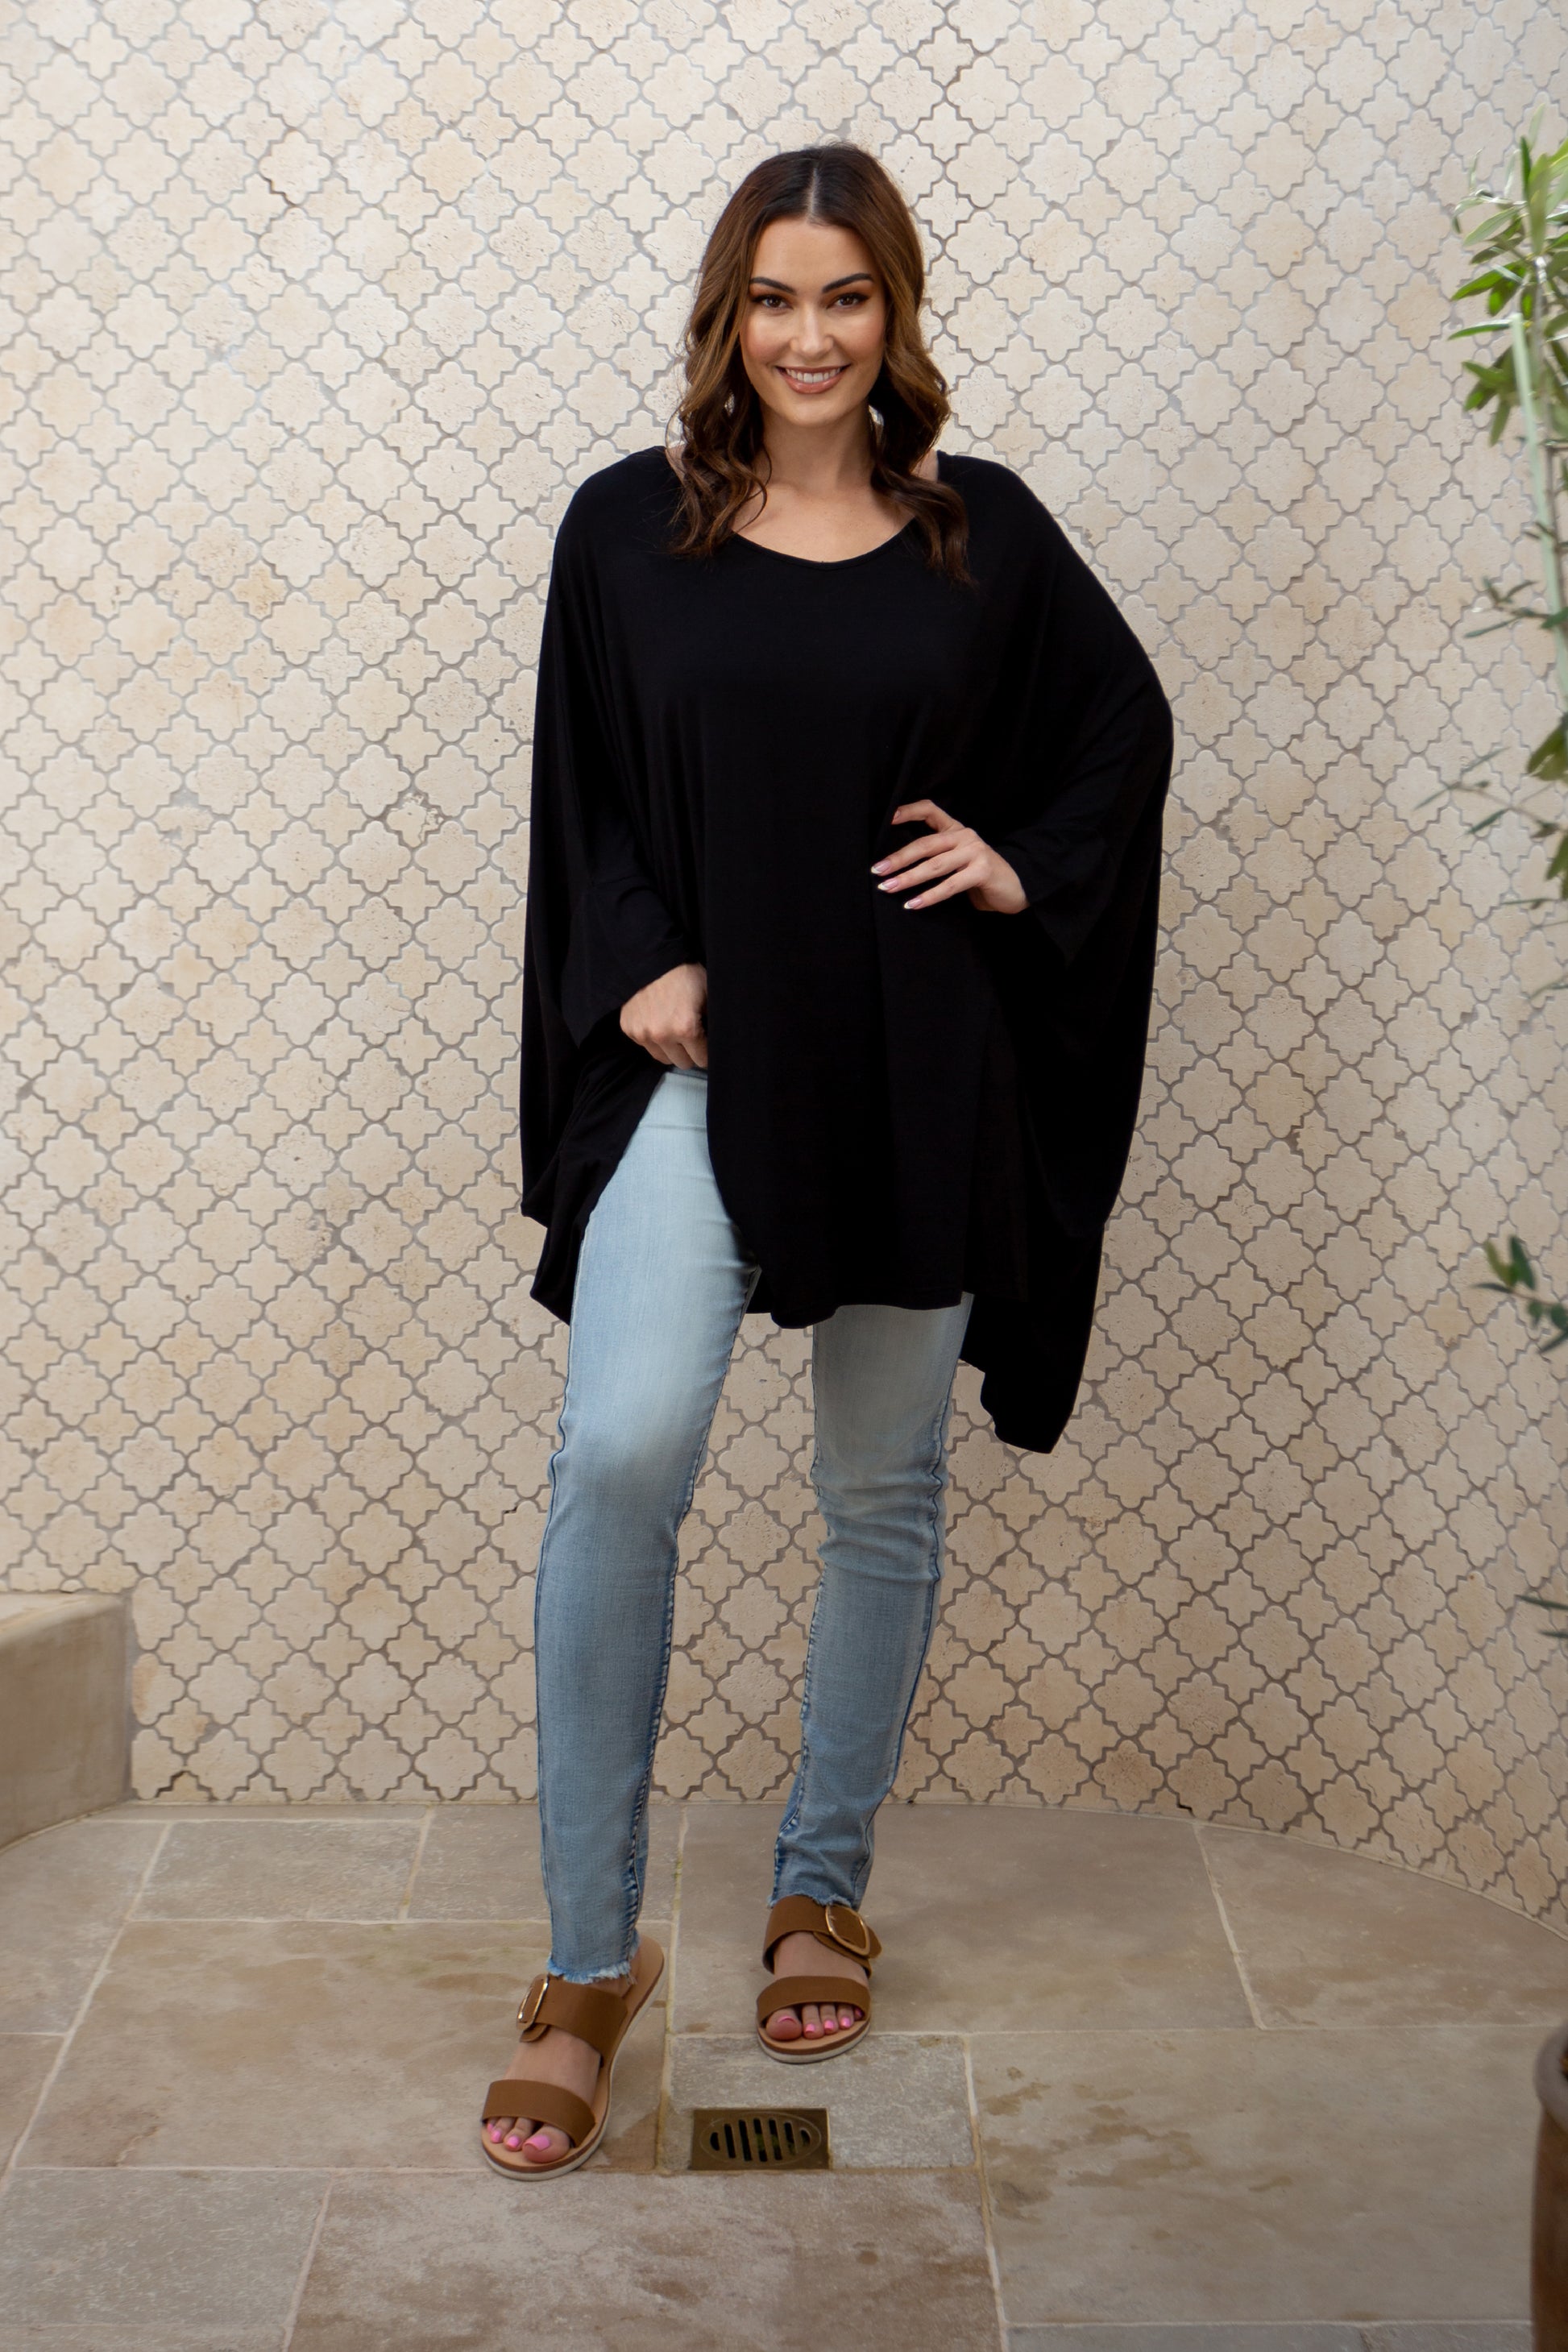 Plus-Sized Black Tops | PQ Collection | Essential Top